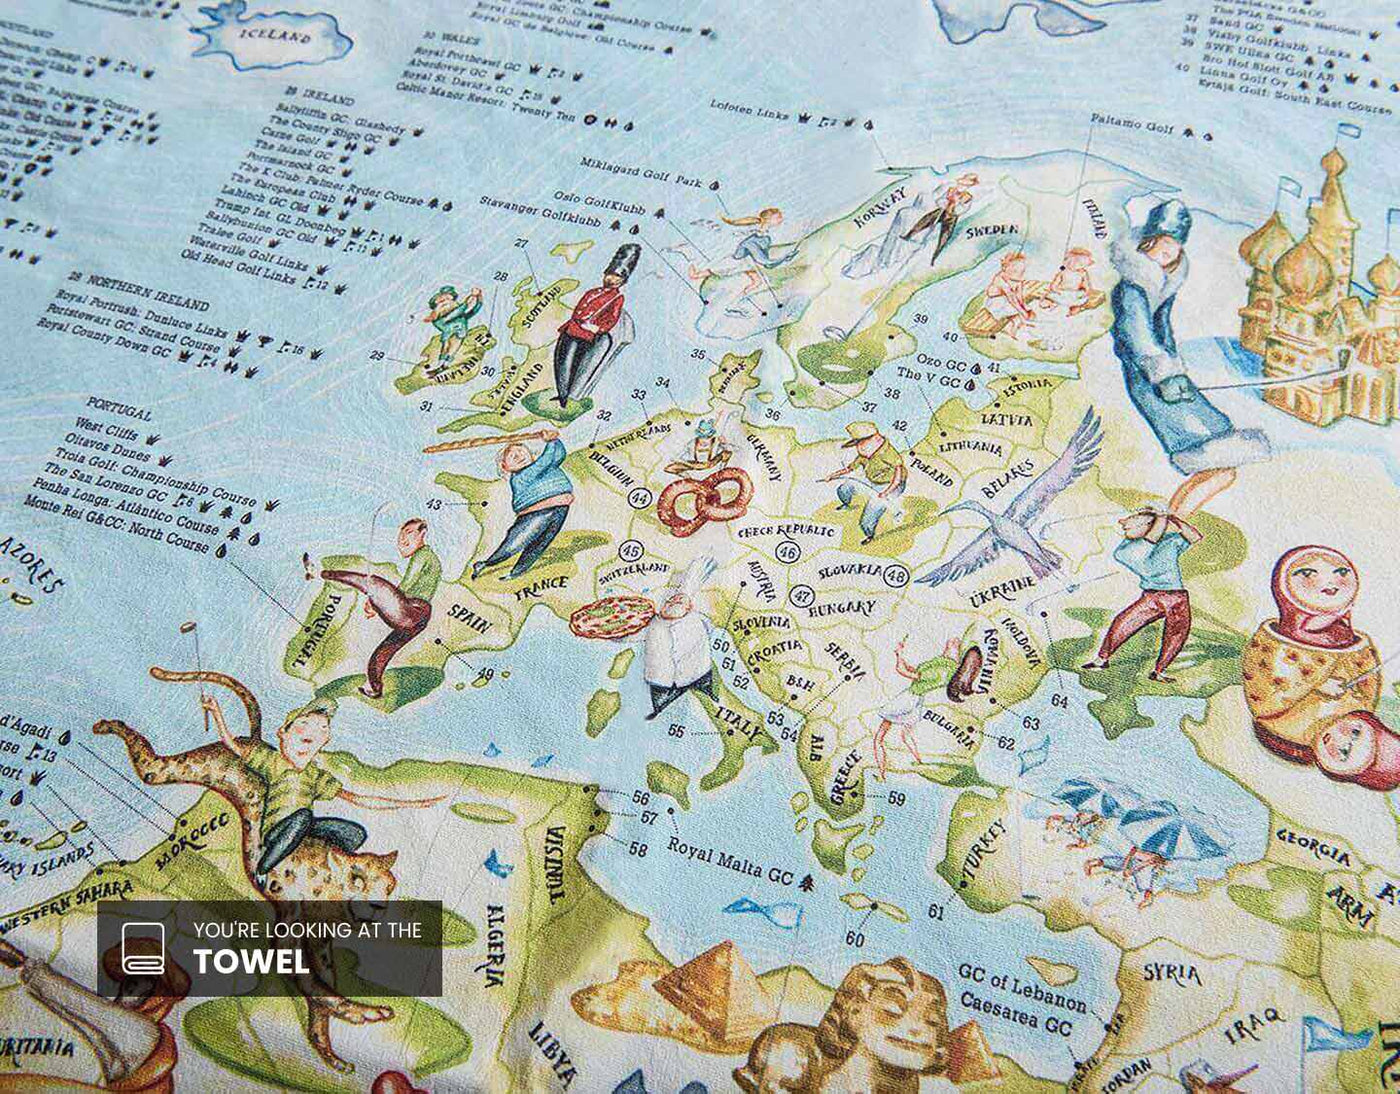 image of funny golf illustrations on world map